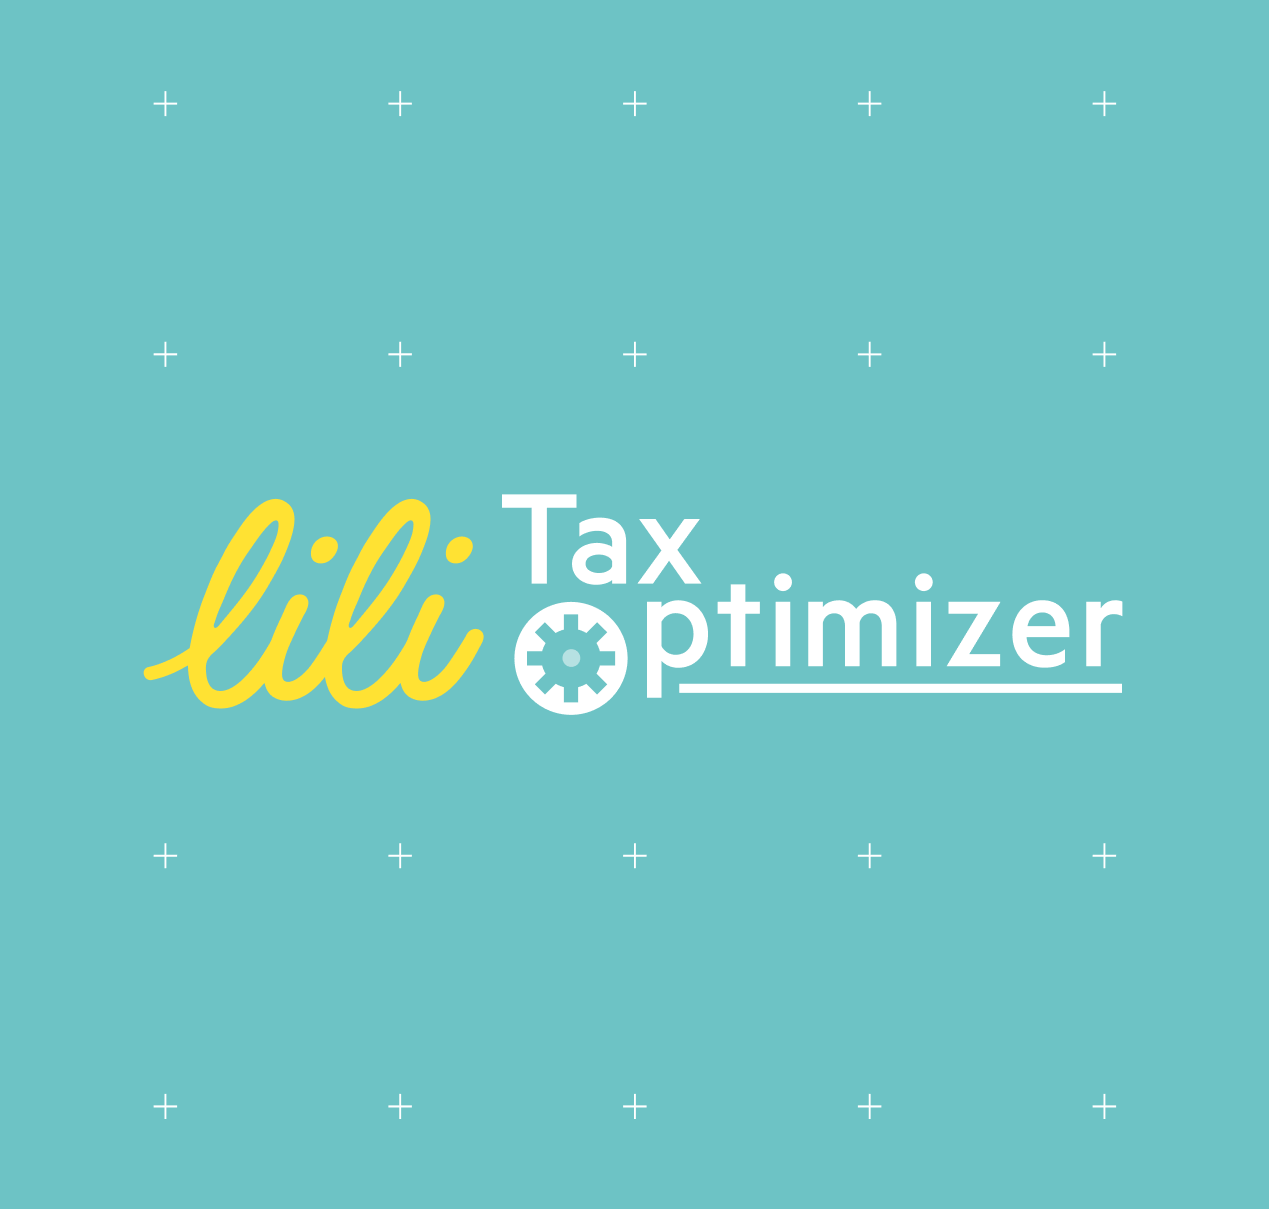 Reduce your taxes and make tax filing simpler with Lili's Tax Optimizer